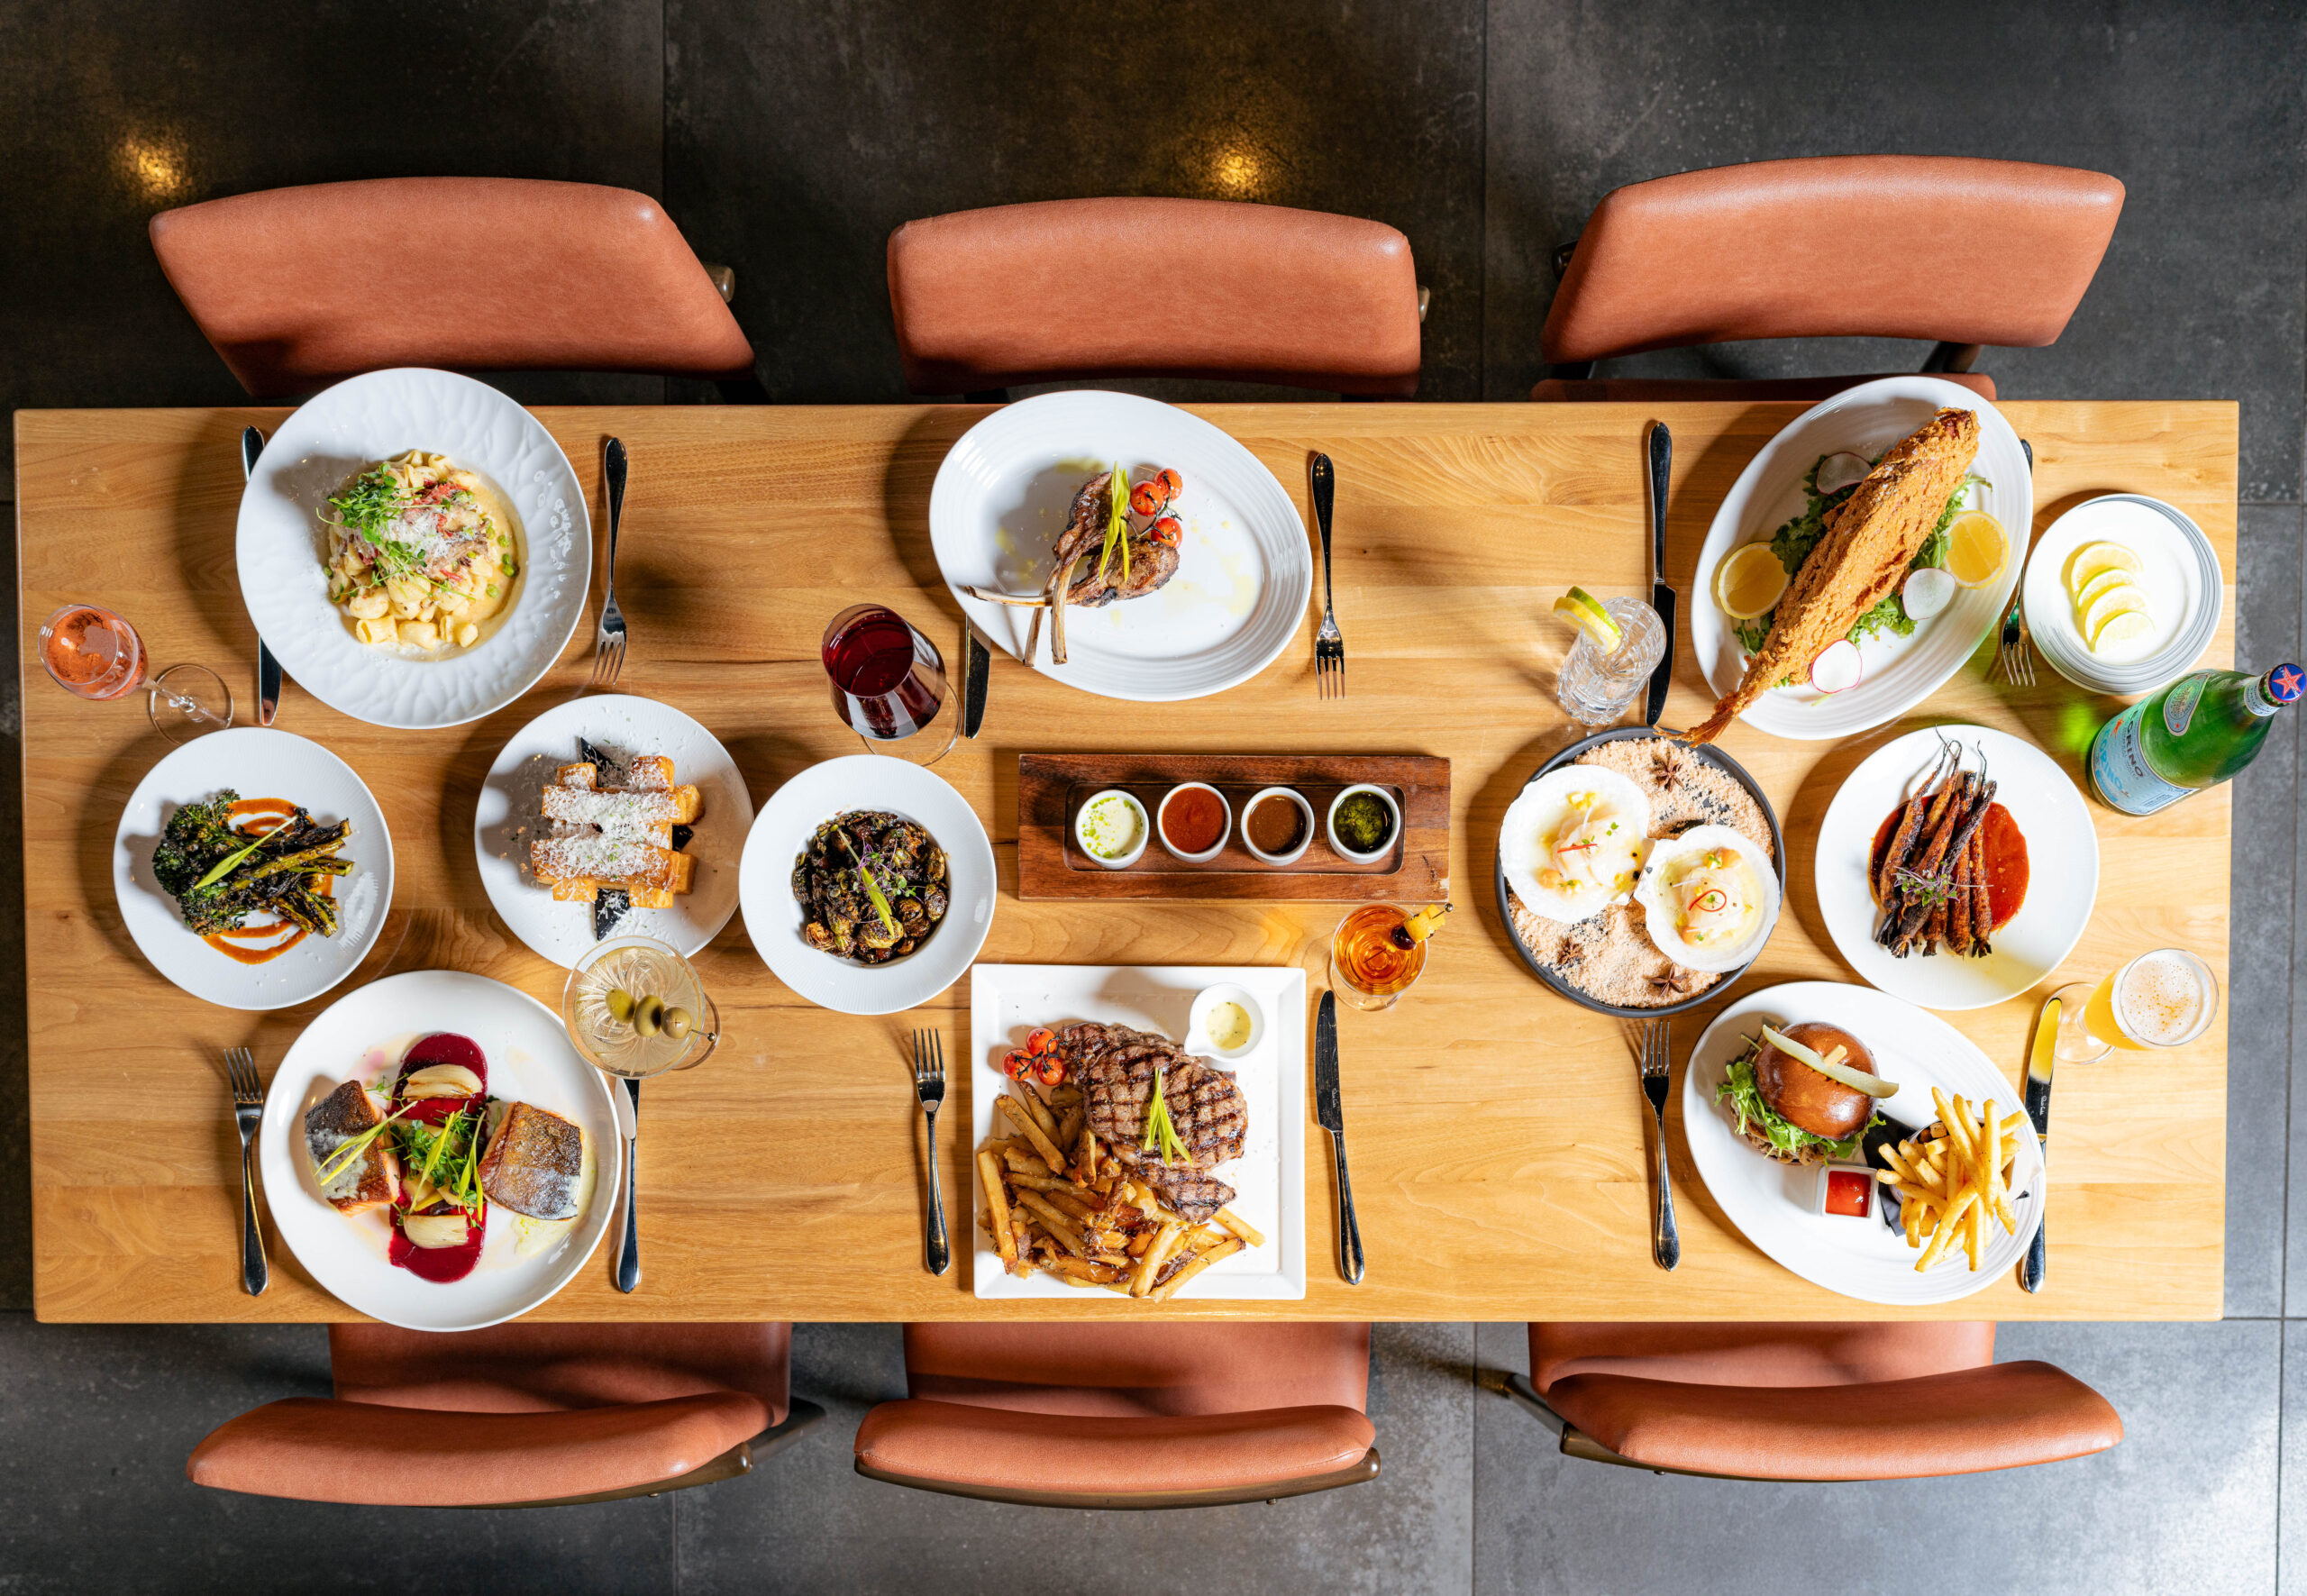 table with multiple plates of food and six chairs